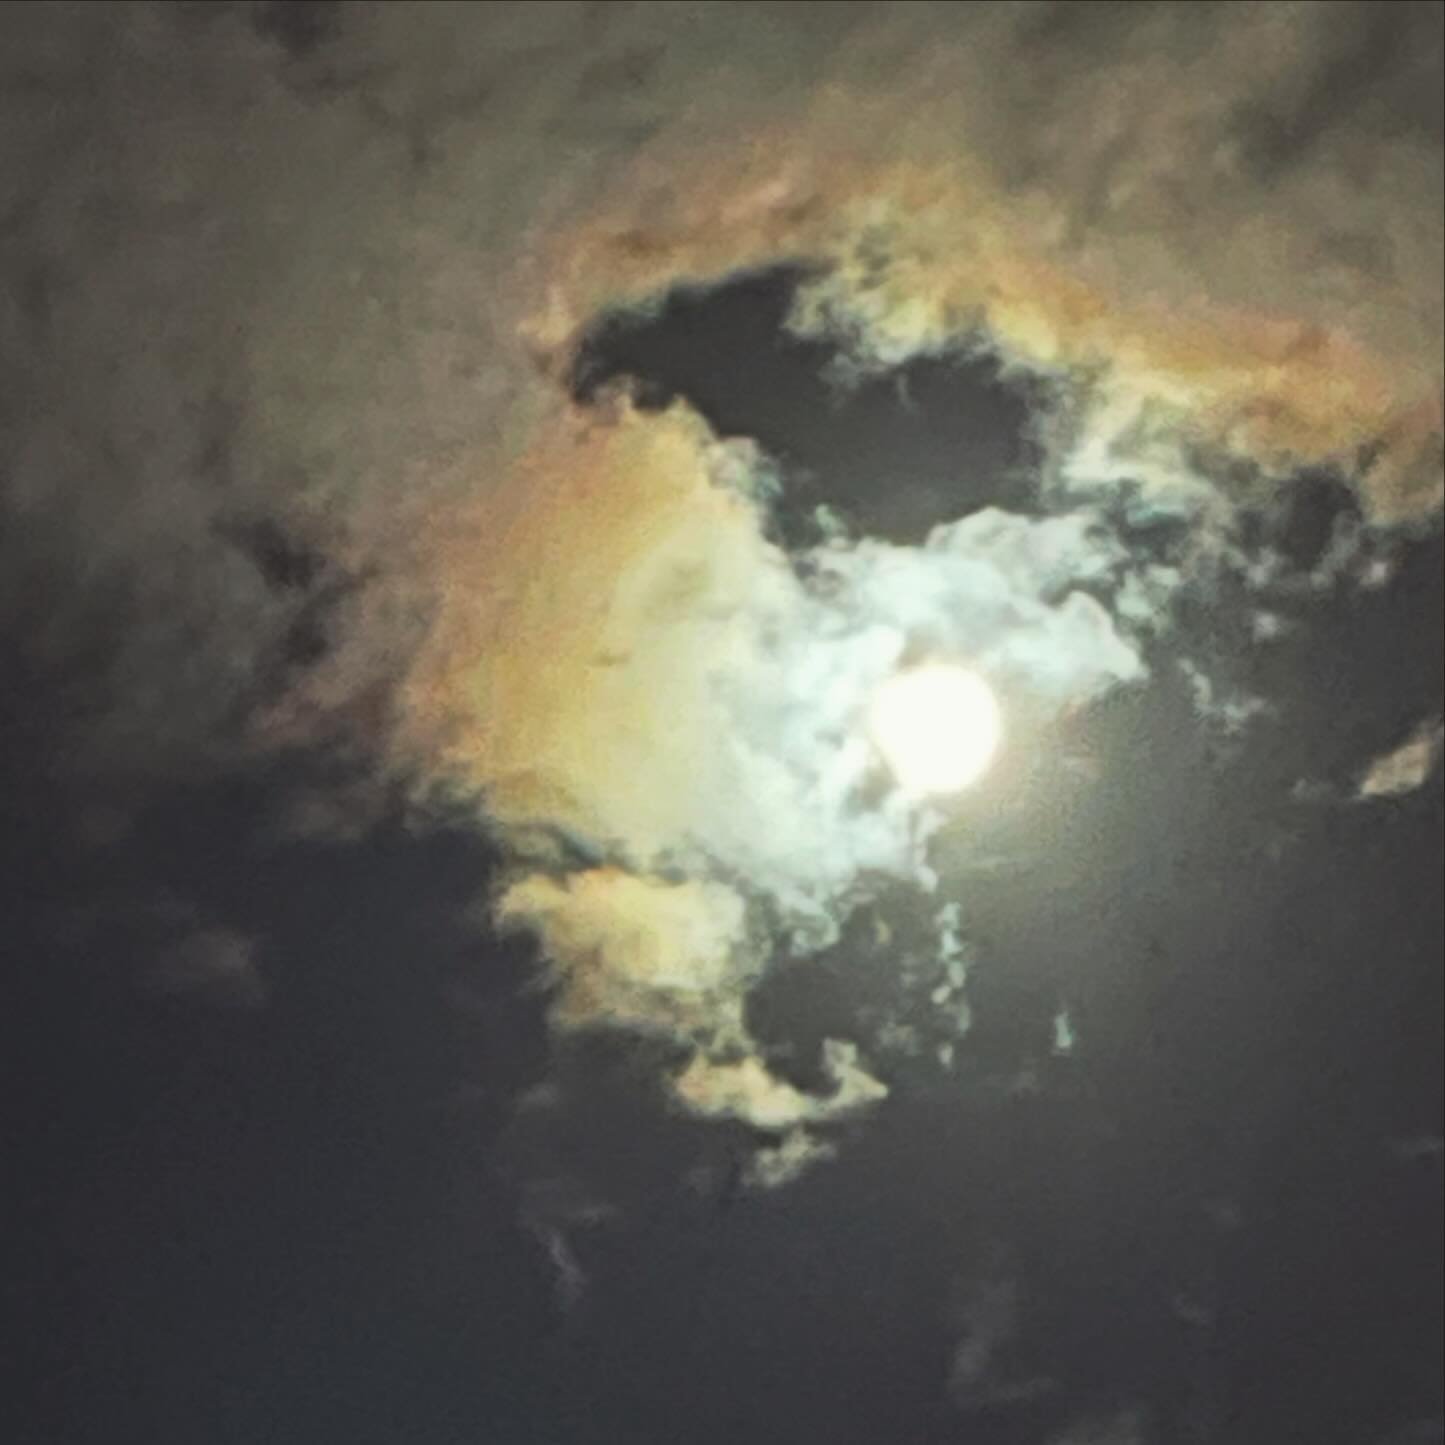 ✨💙✨Let your own light shine bright and share the love and gratitude of your heart! - Dr Christina 
.
.
.
#dr_christina #moon #moonlight #moonphotography #clouds #heart #selfleadership #inspirational #love #motivational #gratitude  #empowerment #fory